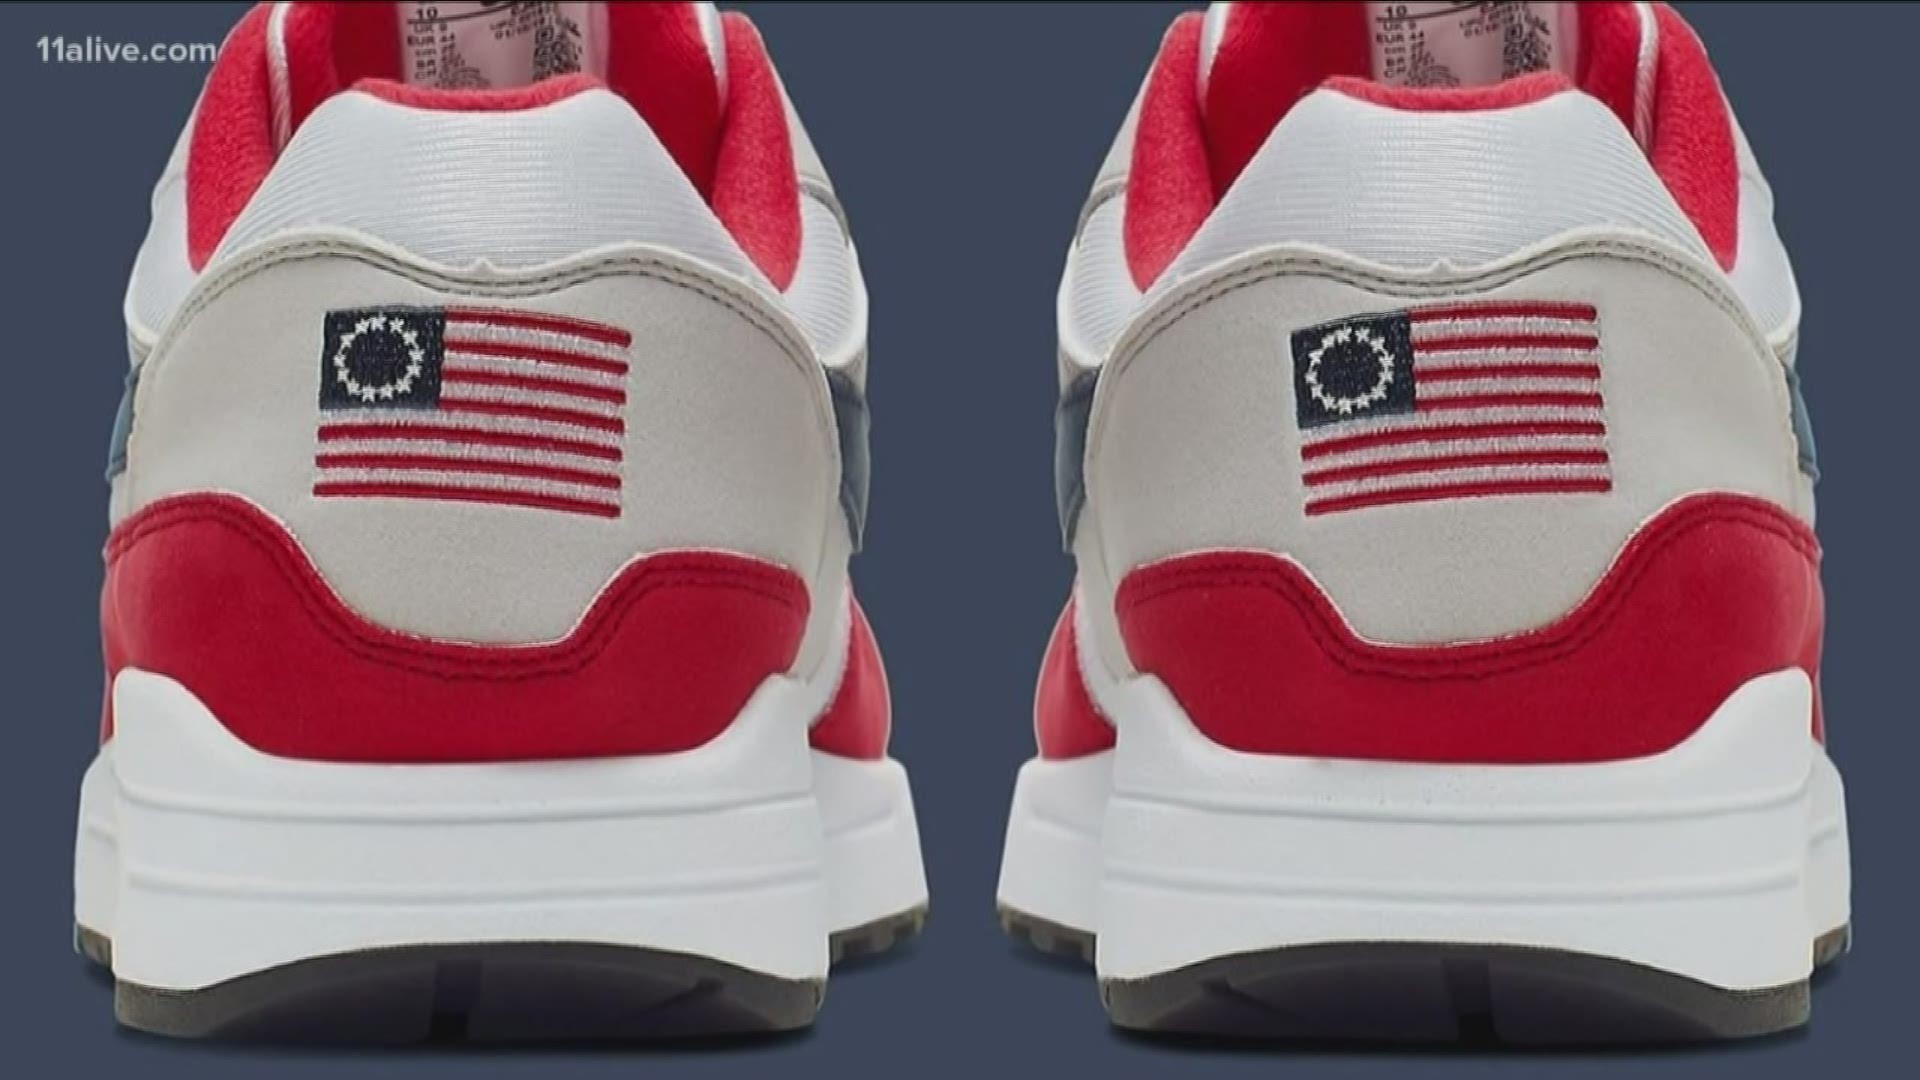 nike betsy ross flag shoes for sale